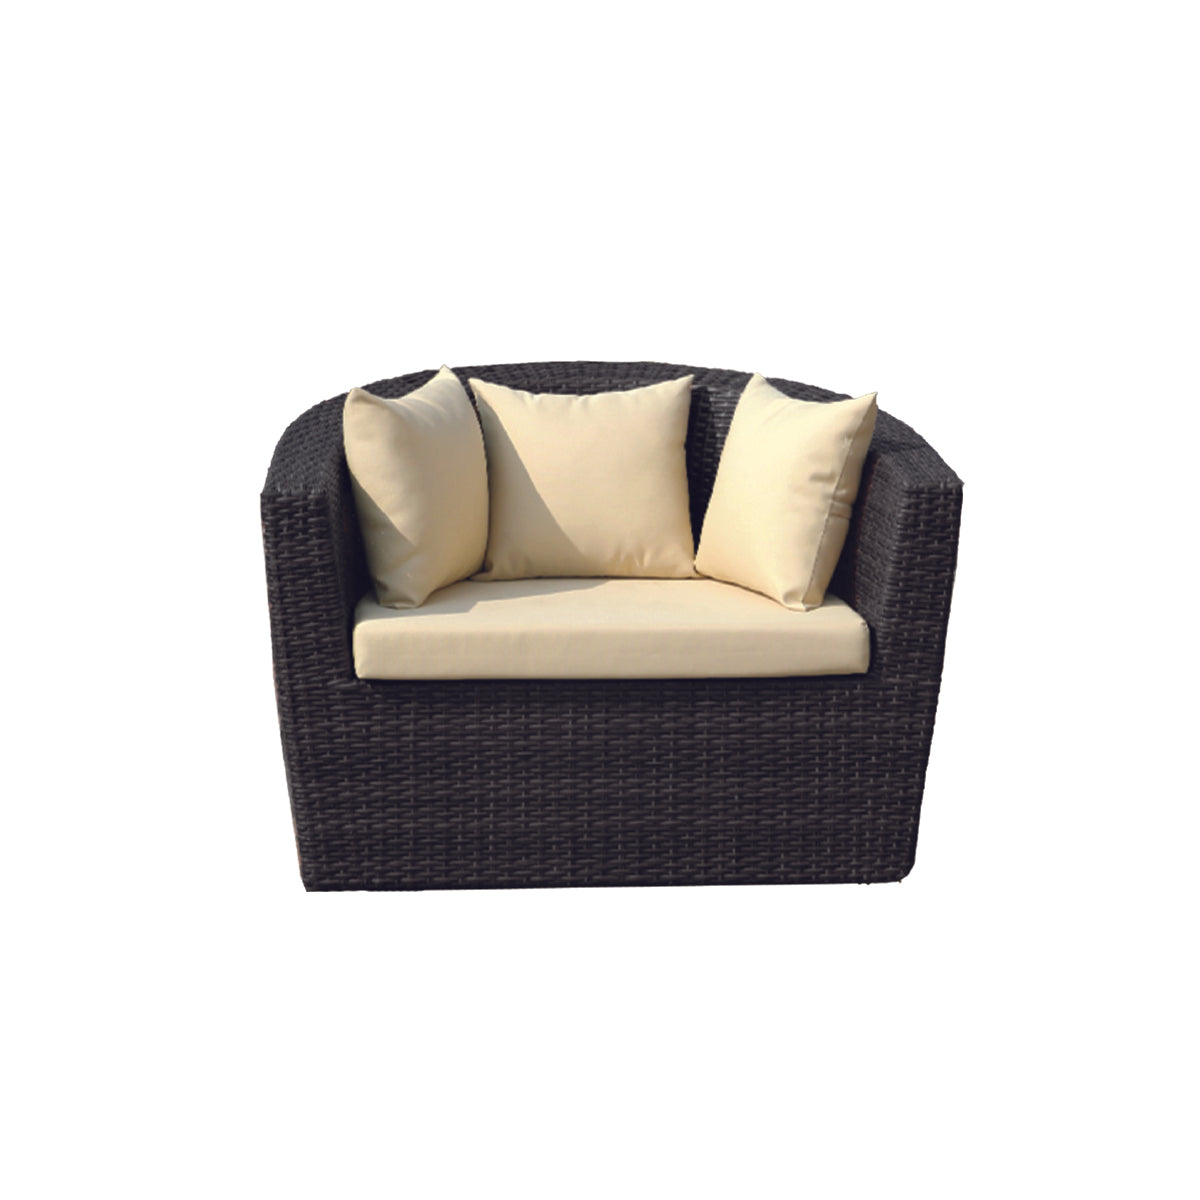 Sofa Chairs with Ottoman in Wicker <br> VL 205